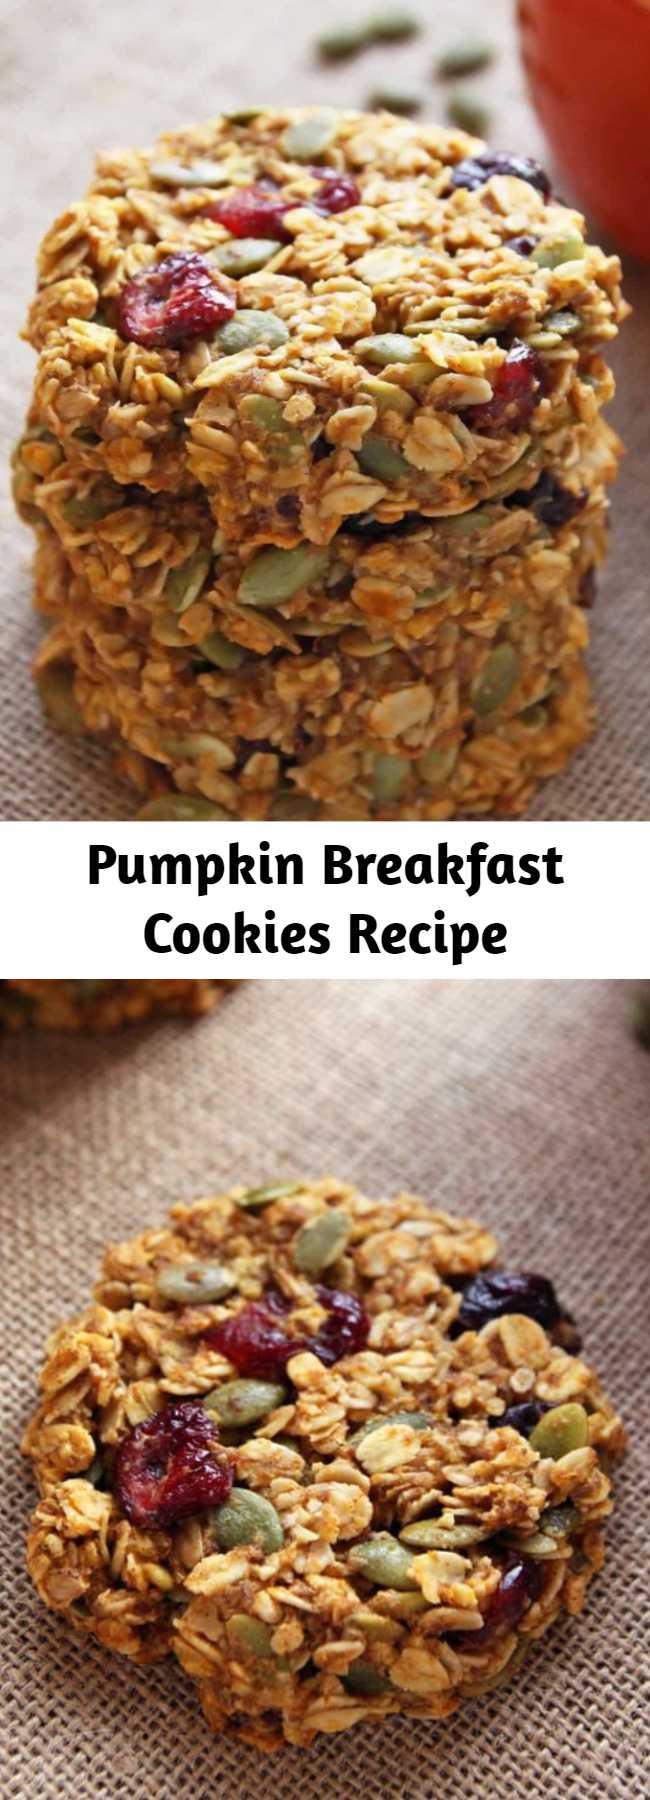 Pumpkin Breakfast Cookies Recipe - These healthy Pumpkin Breakfast Cookies make a nutritious and grab-and-go breakfast that tastes like fall! This gluten-free and clean eating breakfast treat is made with wholegrain oats, cranberries, pumpkin seeds and honey.